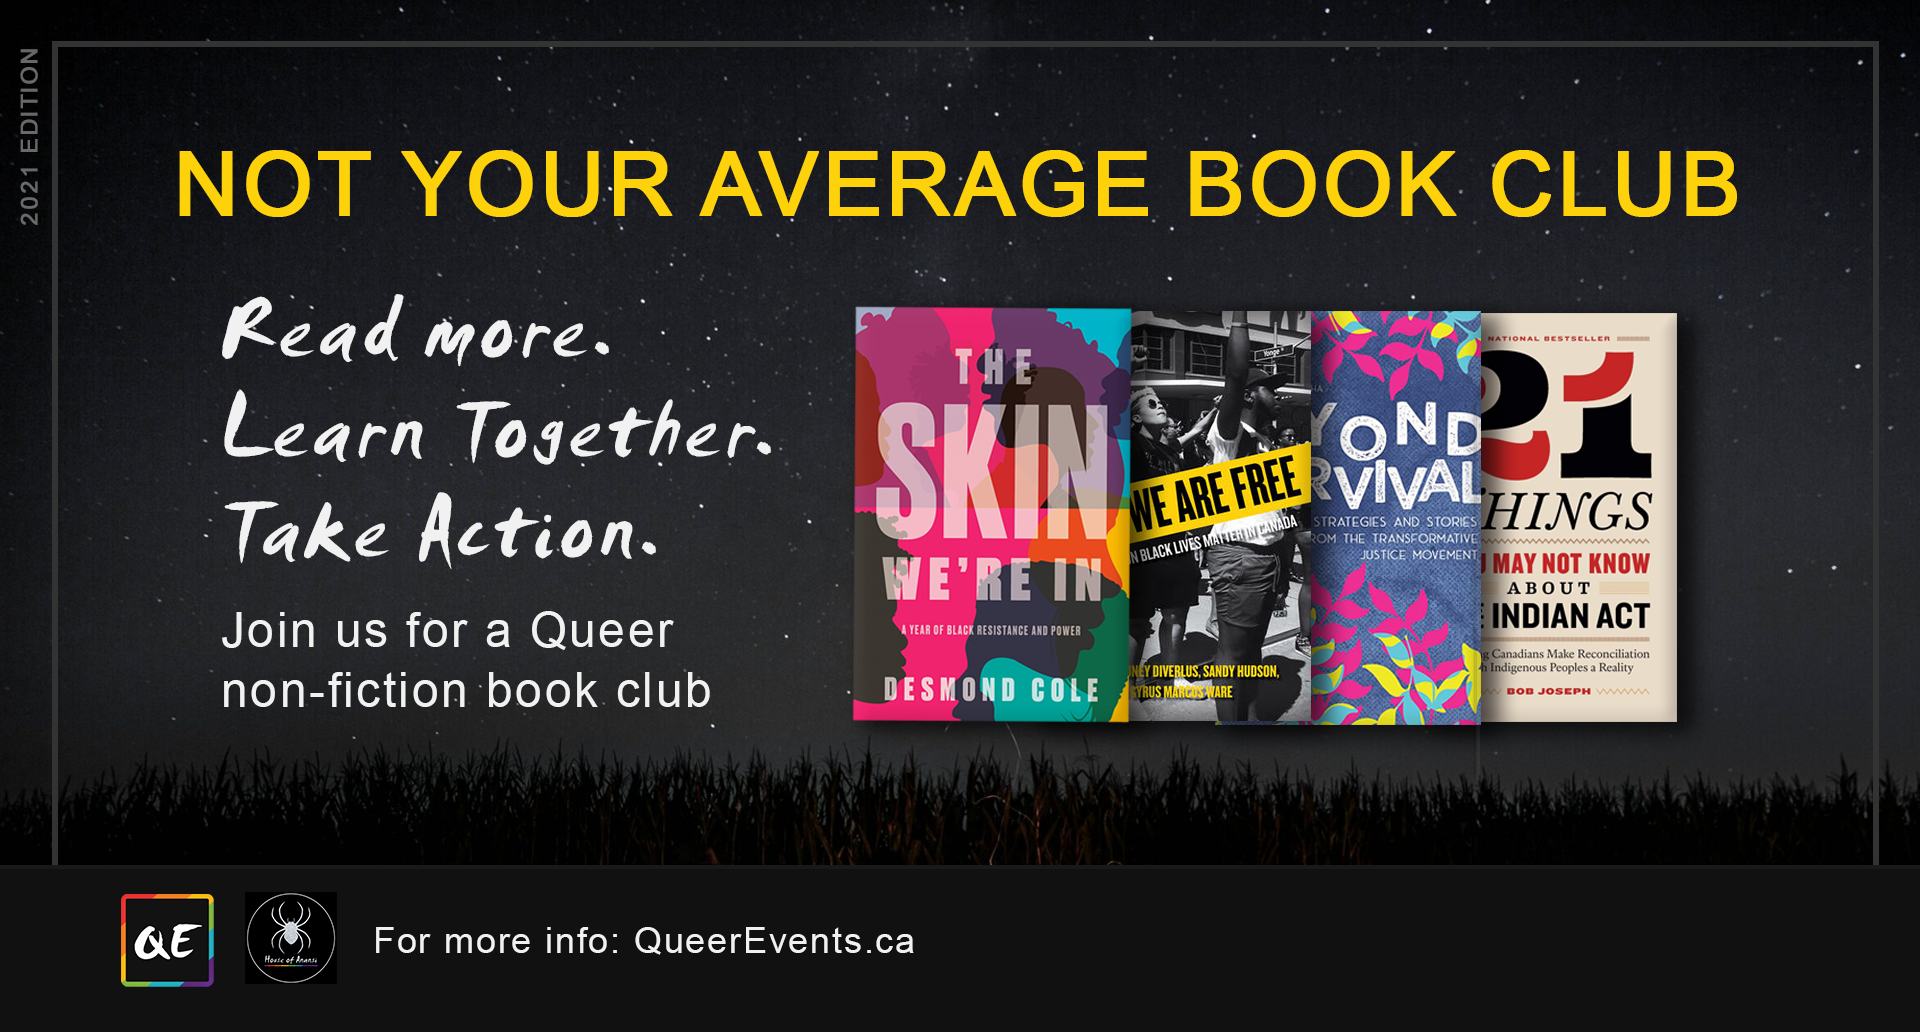 QueerEvents.ca - queer book club non-fiction edition event series banner